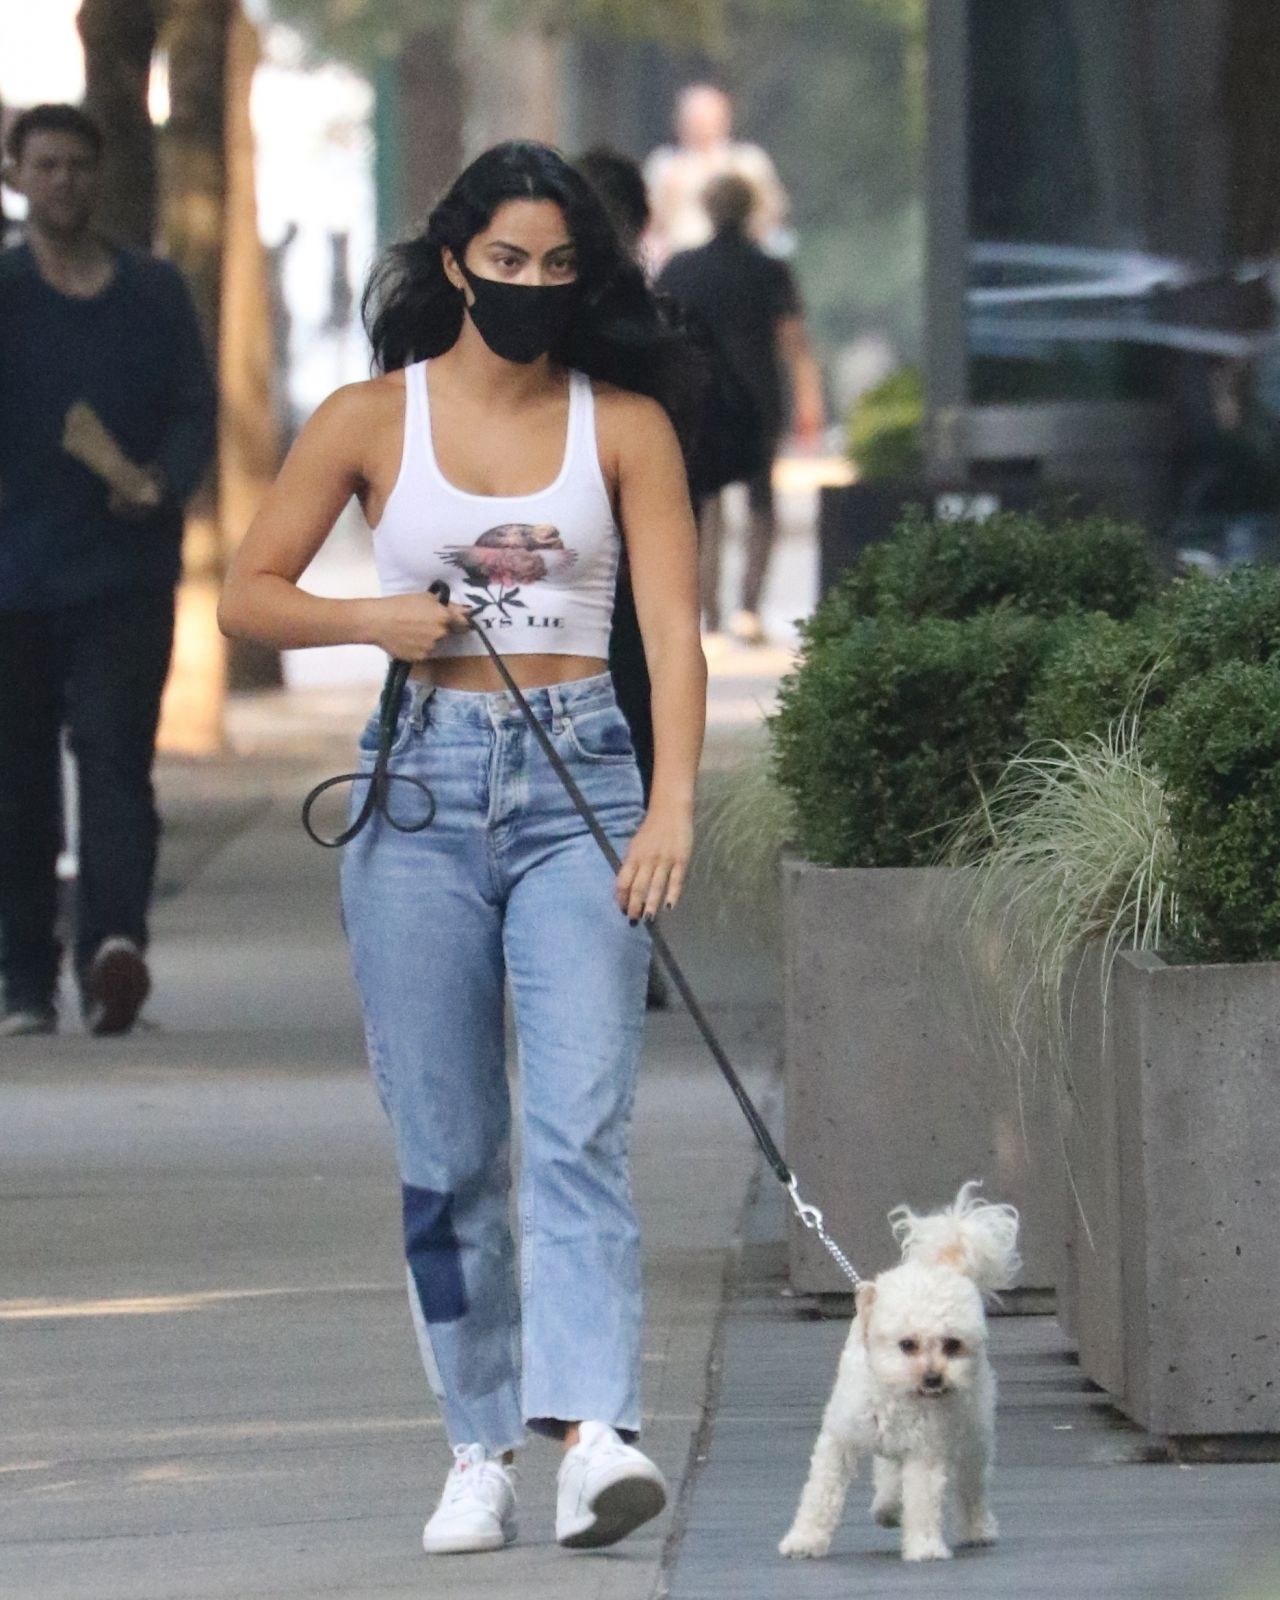 camila-mendes-out-in-vancouver-09-11-2020-9.jpg